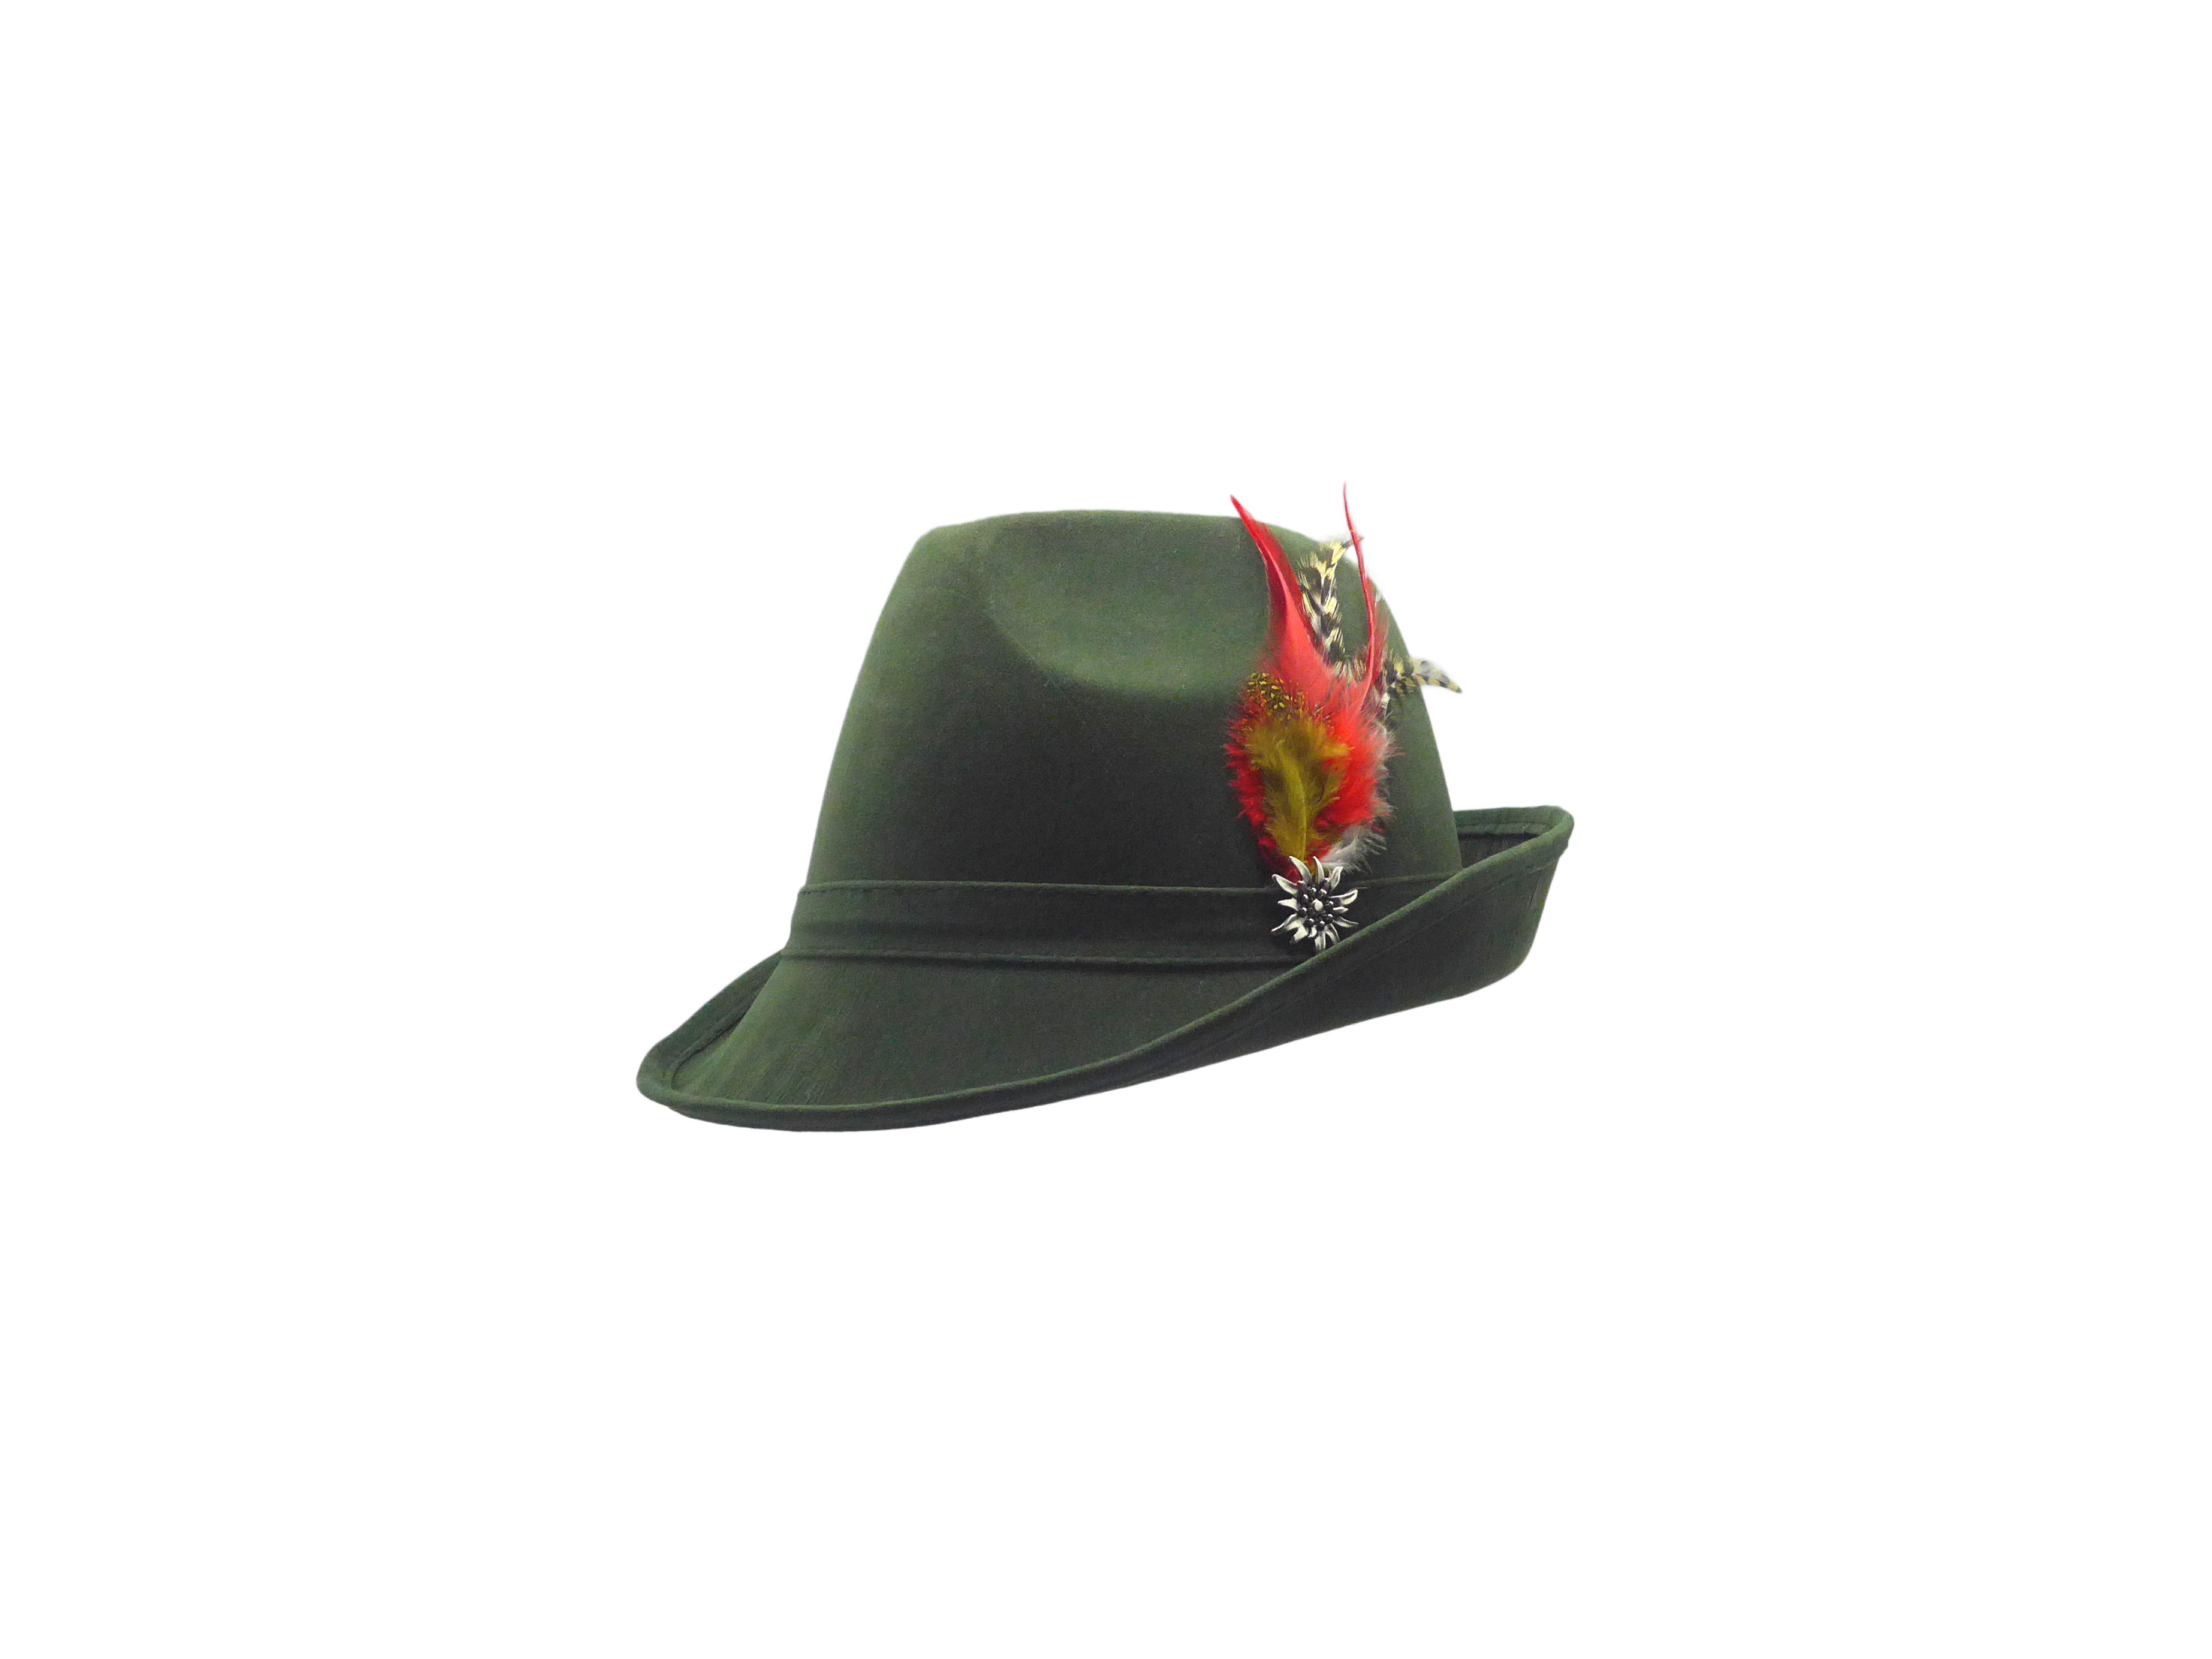 Germ Peacock & Pheasant Oktoberfest Hunter Hat Feathers with Stag Pin